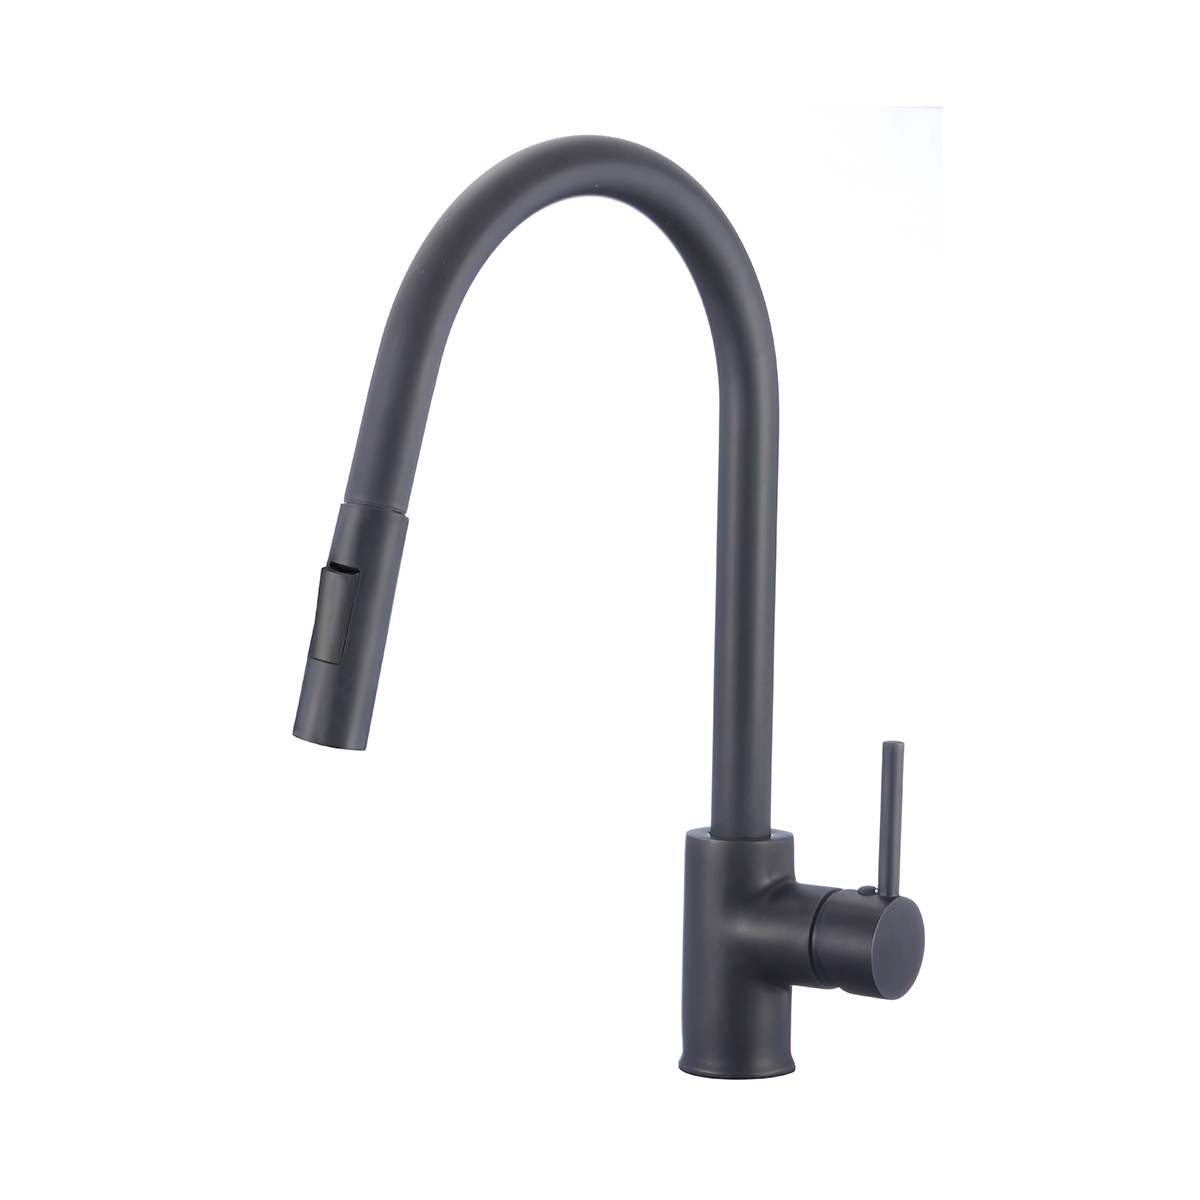 Pelican Int'l Fountain Series PL-8231 Single Hole Pull Down Kitchen Faucet In Matte Black